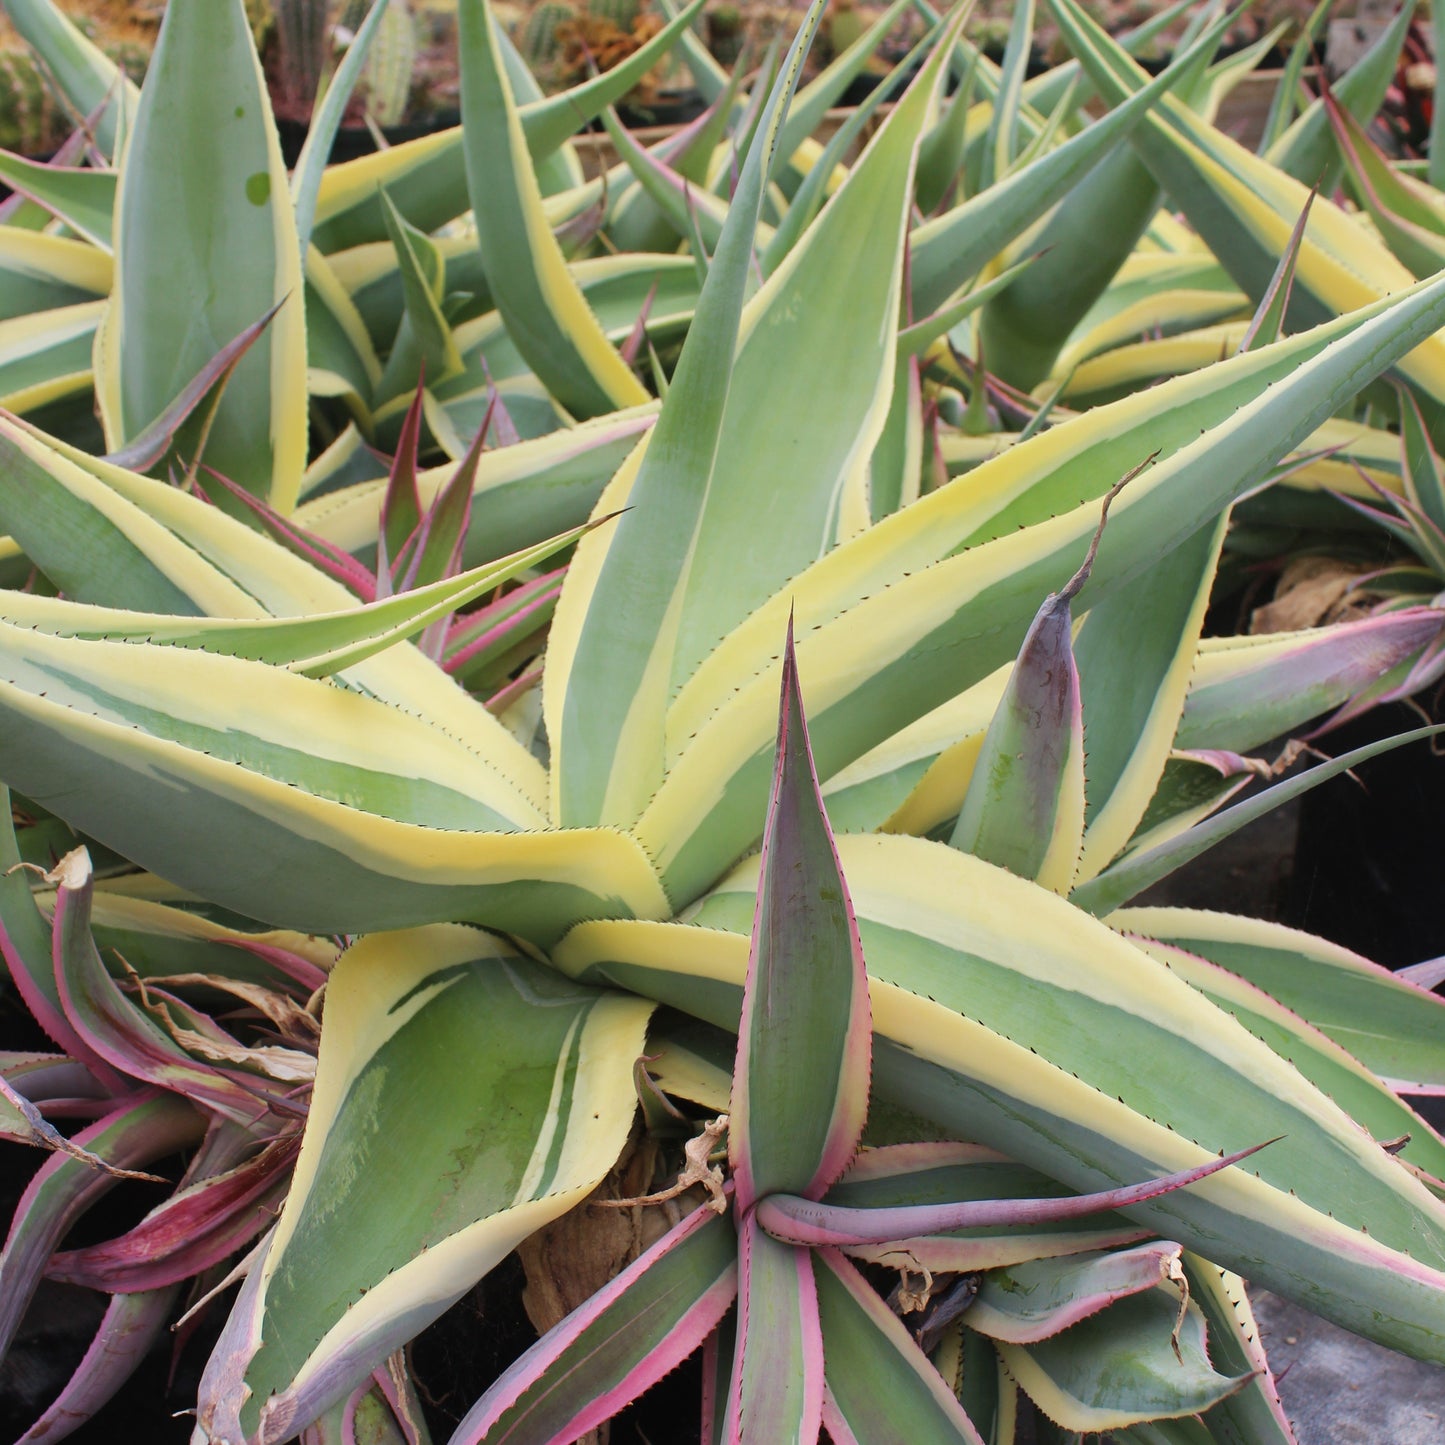 Agave guiengola 'Creme Brulee'